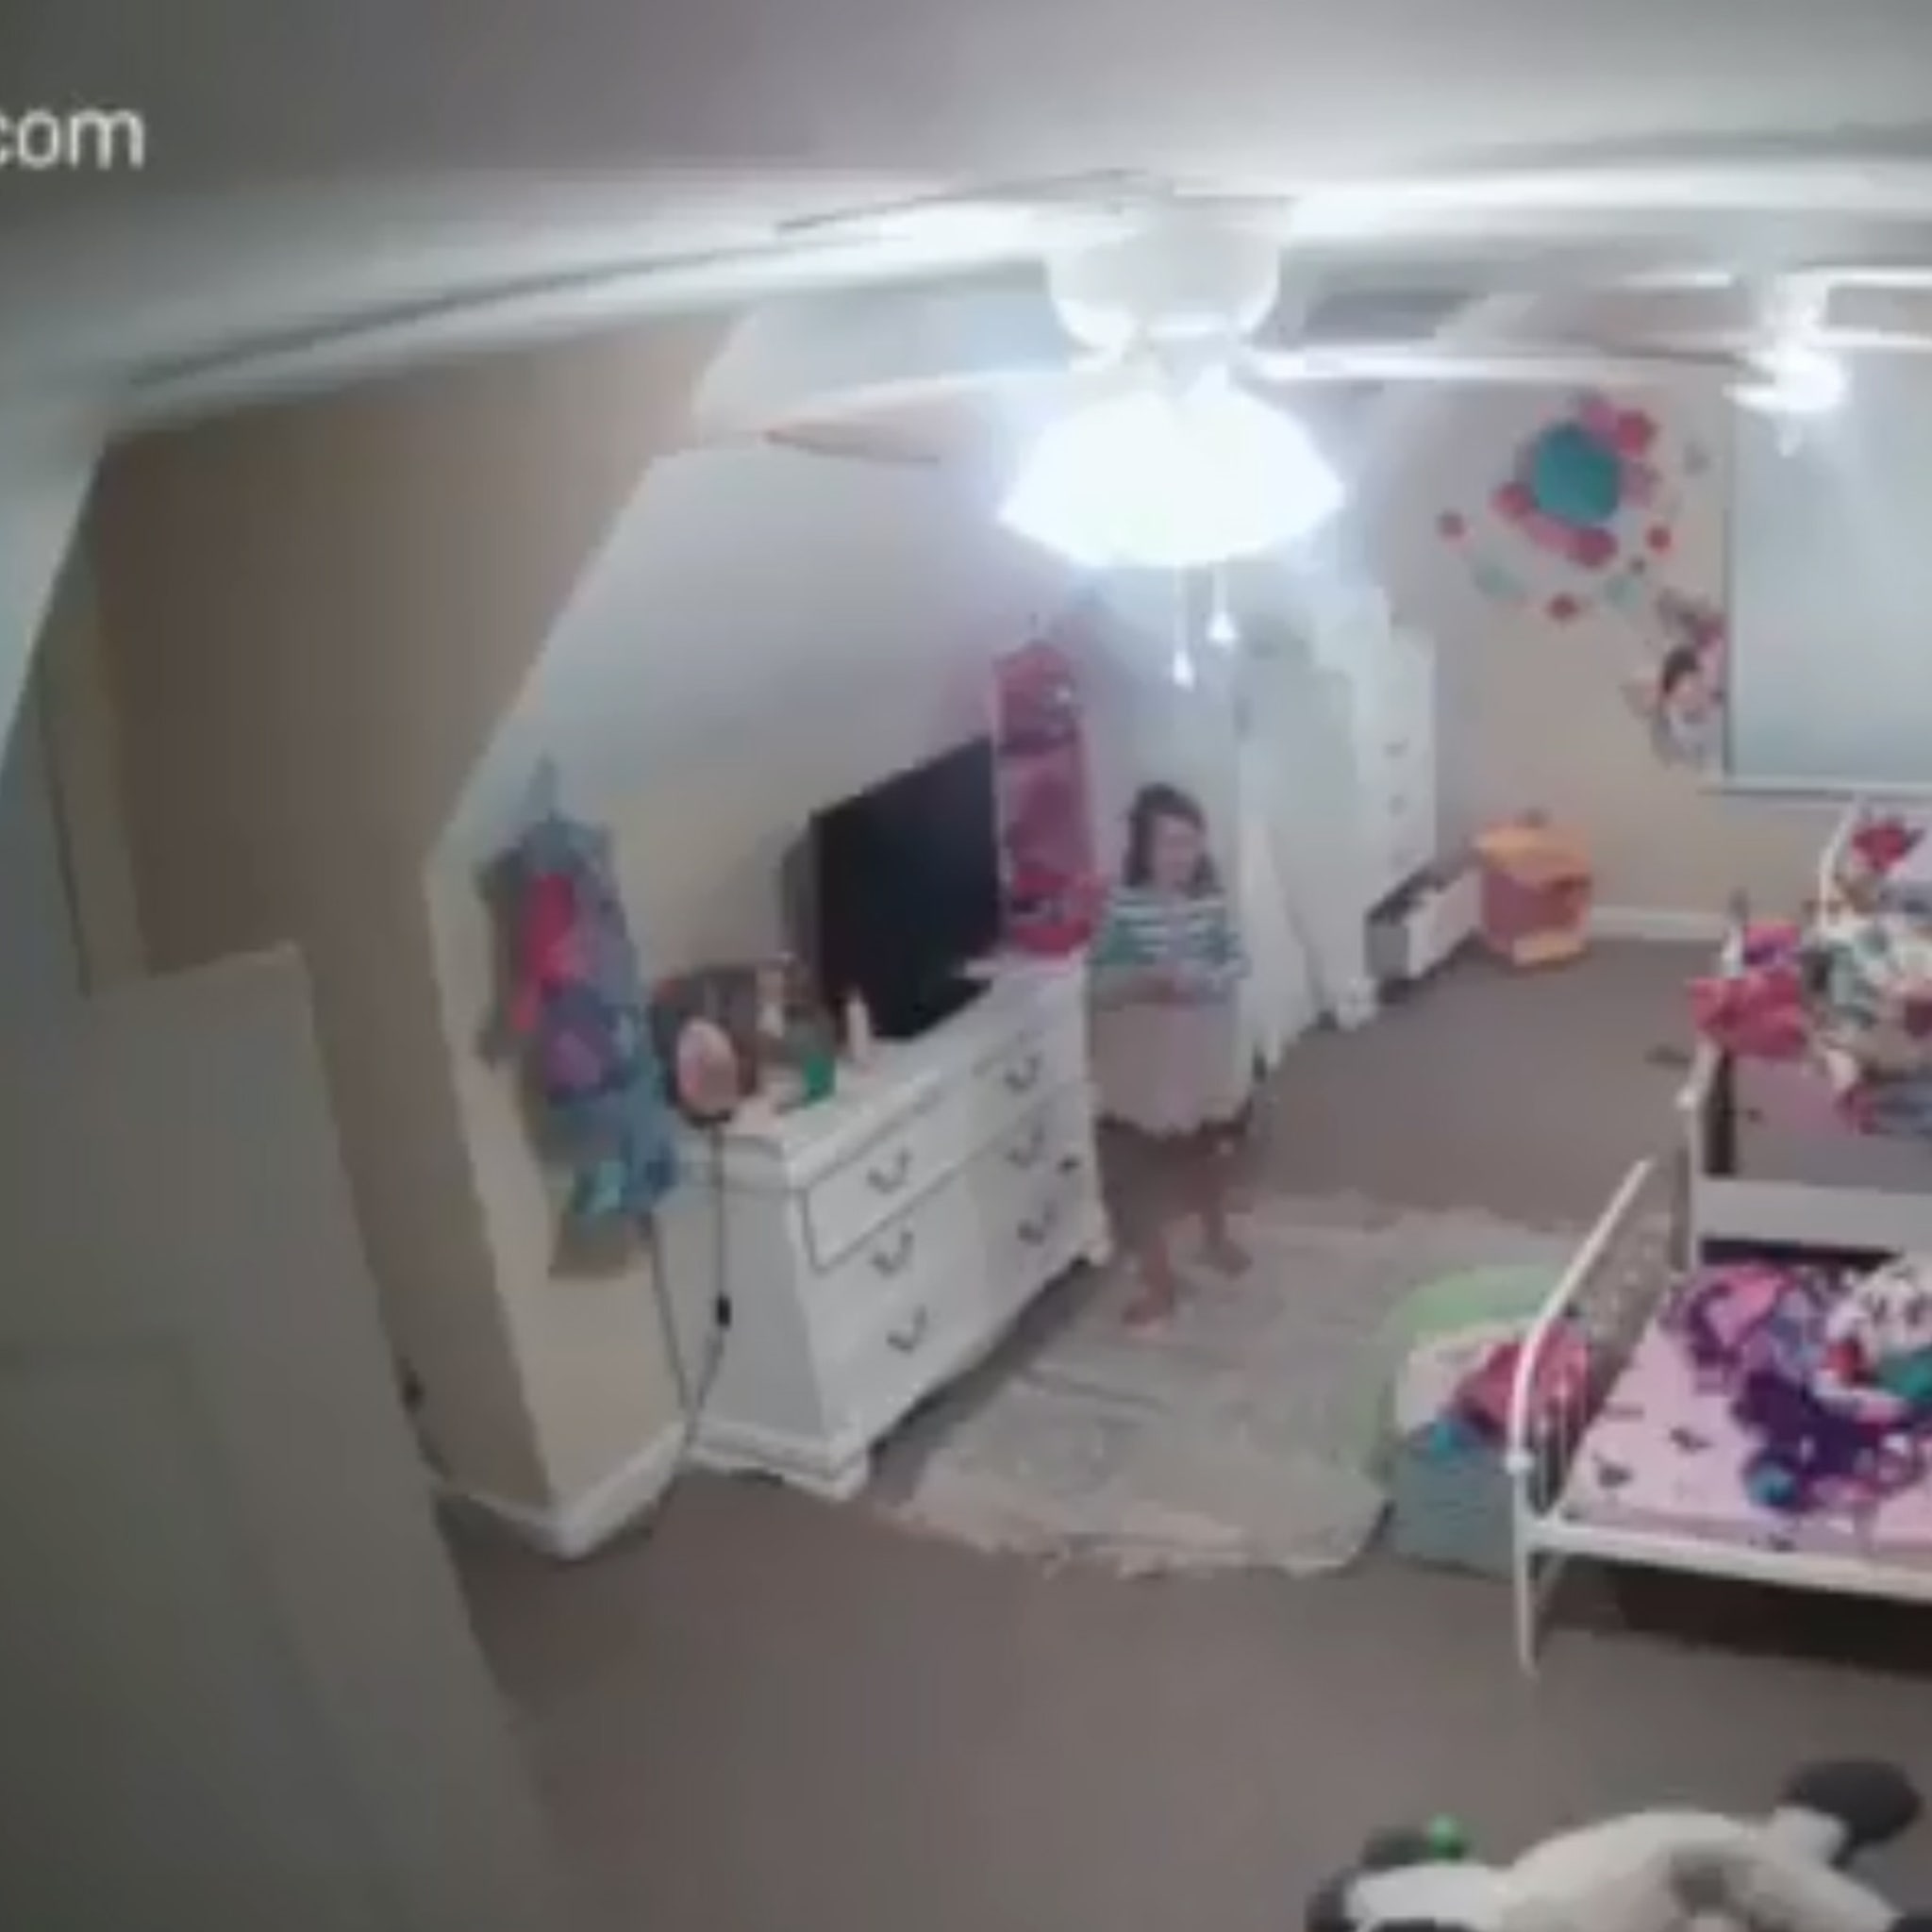 Creepy Footage Shows Ring Camera Hacker Trying To Befriend